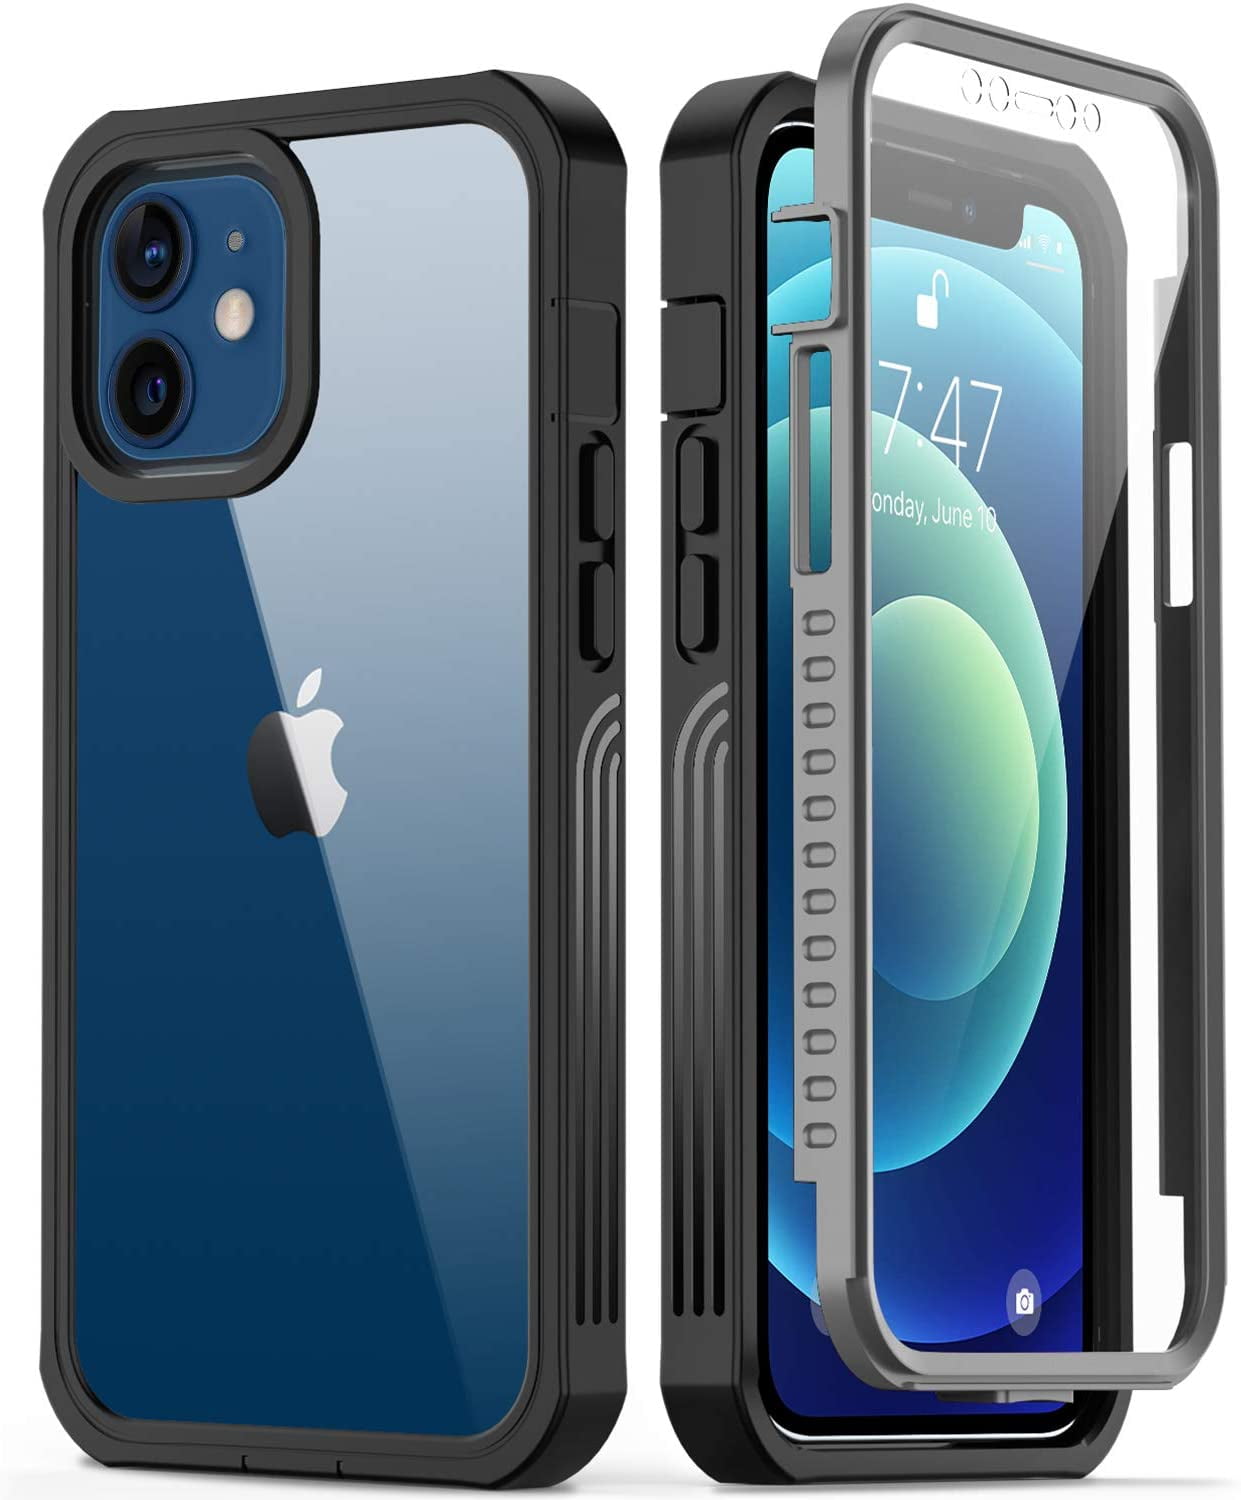 iPhone 12 Pro Case, Phone Case for 2020 iPhone 12 Pro, Njjex Hard Plastic Full-Body Rugged Transparent Clear Back Bumper Case Cover for Apple iPhone